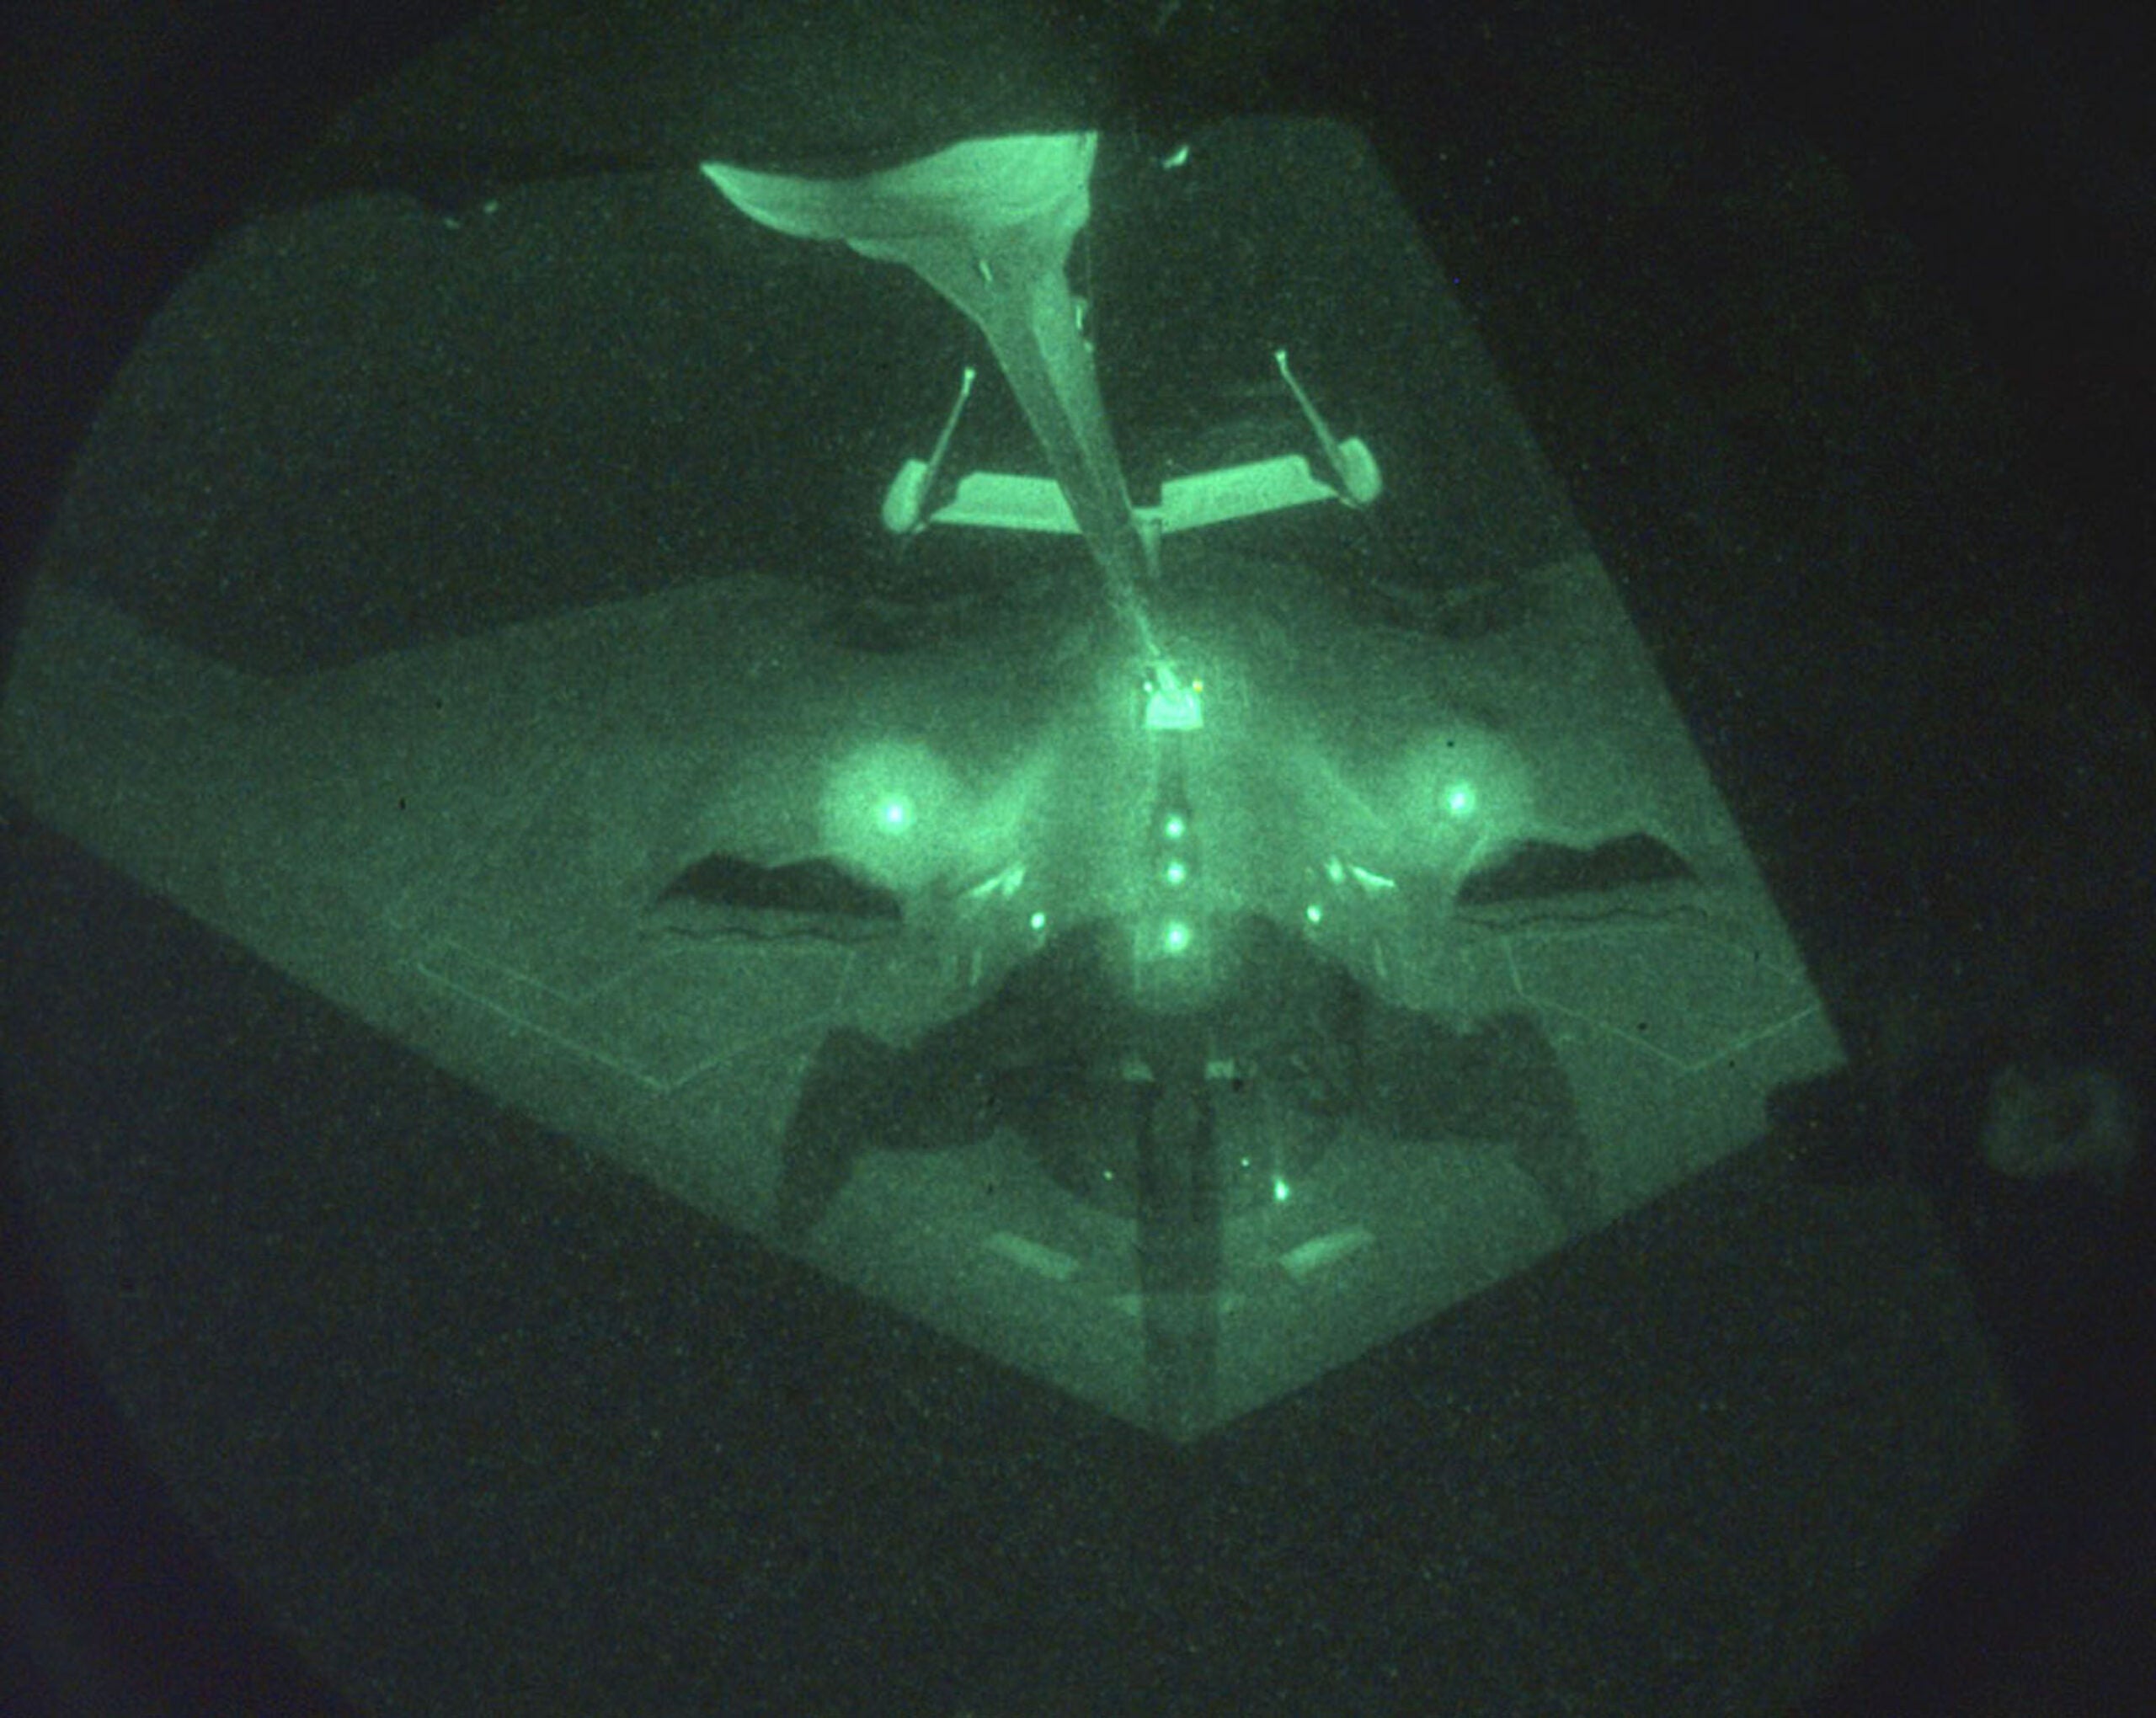 395554 05: (FILE PHOTO) A B-2 bomber refuels from a KC-10 after completing a mission in support of NATO Operation Allied Force in an undated photo. The U.S.-led bombing campaign in Afghanistan is in a third round of air and sea launched attacks, reportedly using B-2 bombers October 9, 2001 with bombs and missiles aimed at air defense and other military targets, senior Pentagon officials said. (Photo by USAF/Getty Images)